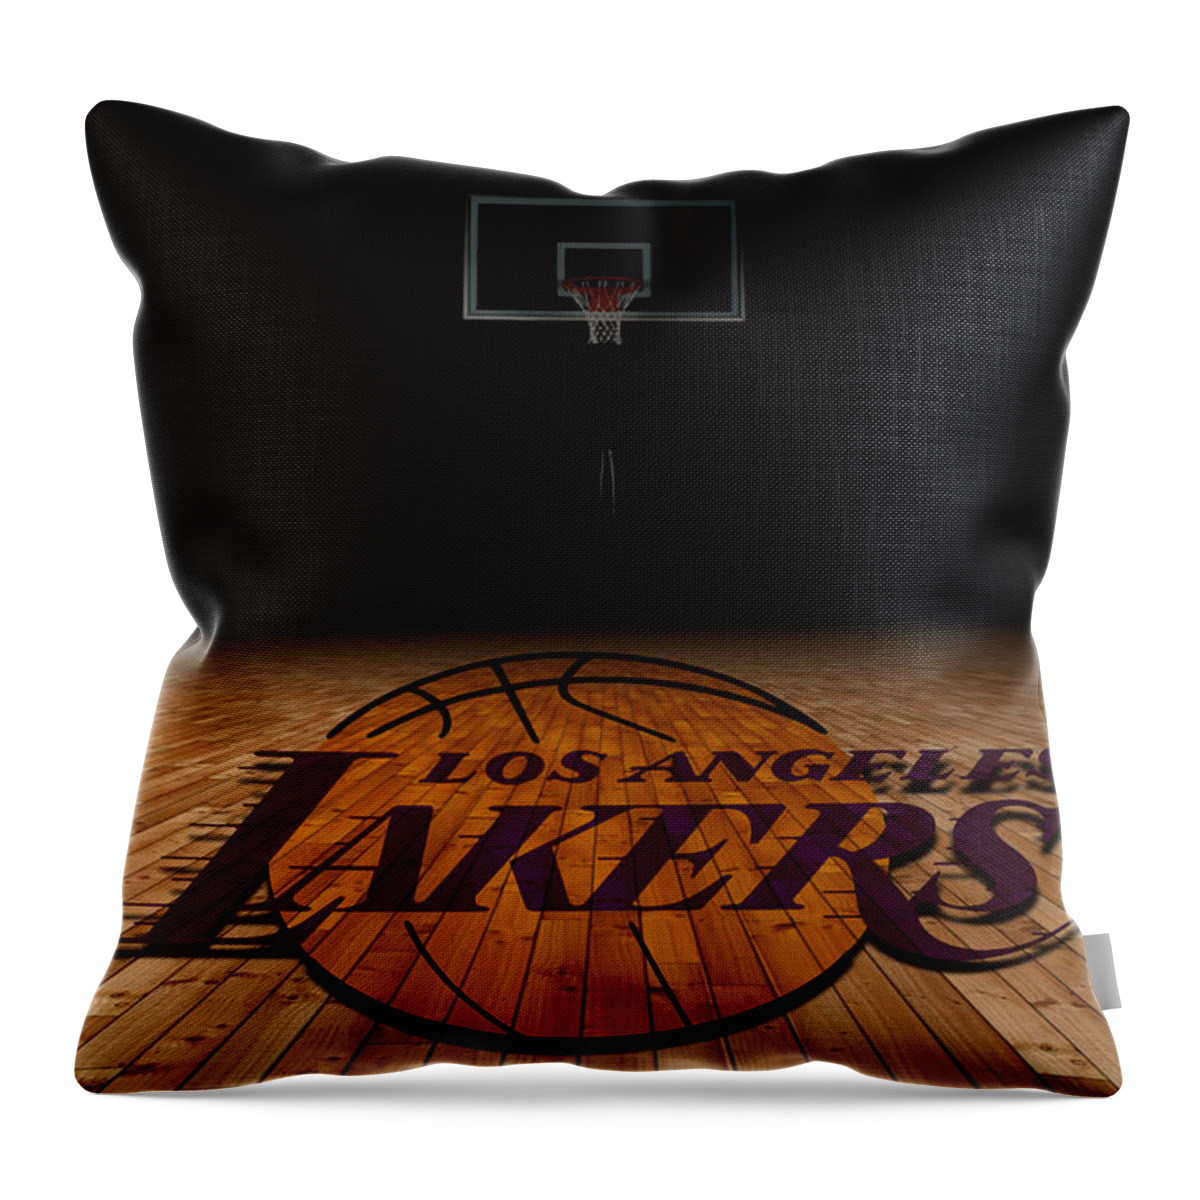 Lakers Throw Pillow featuring the photograph Los Angeles Lakers by Joe Hamilton